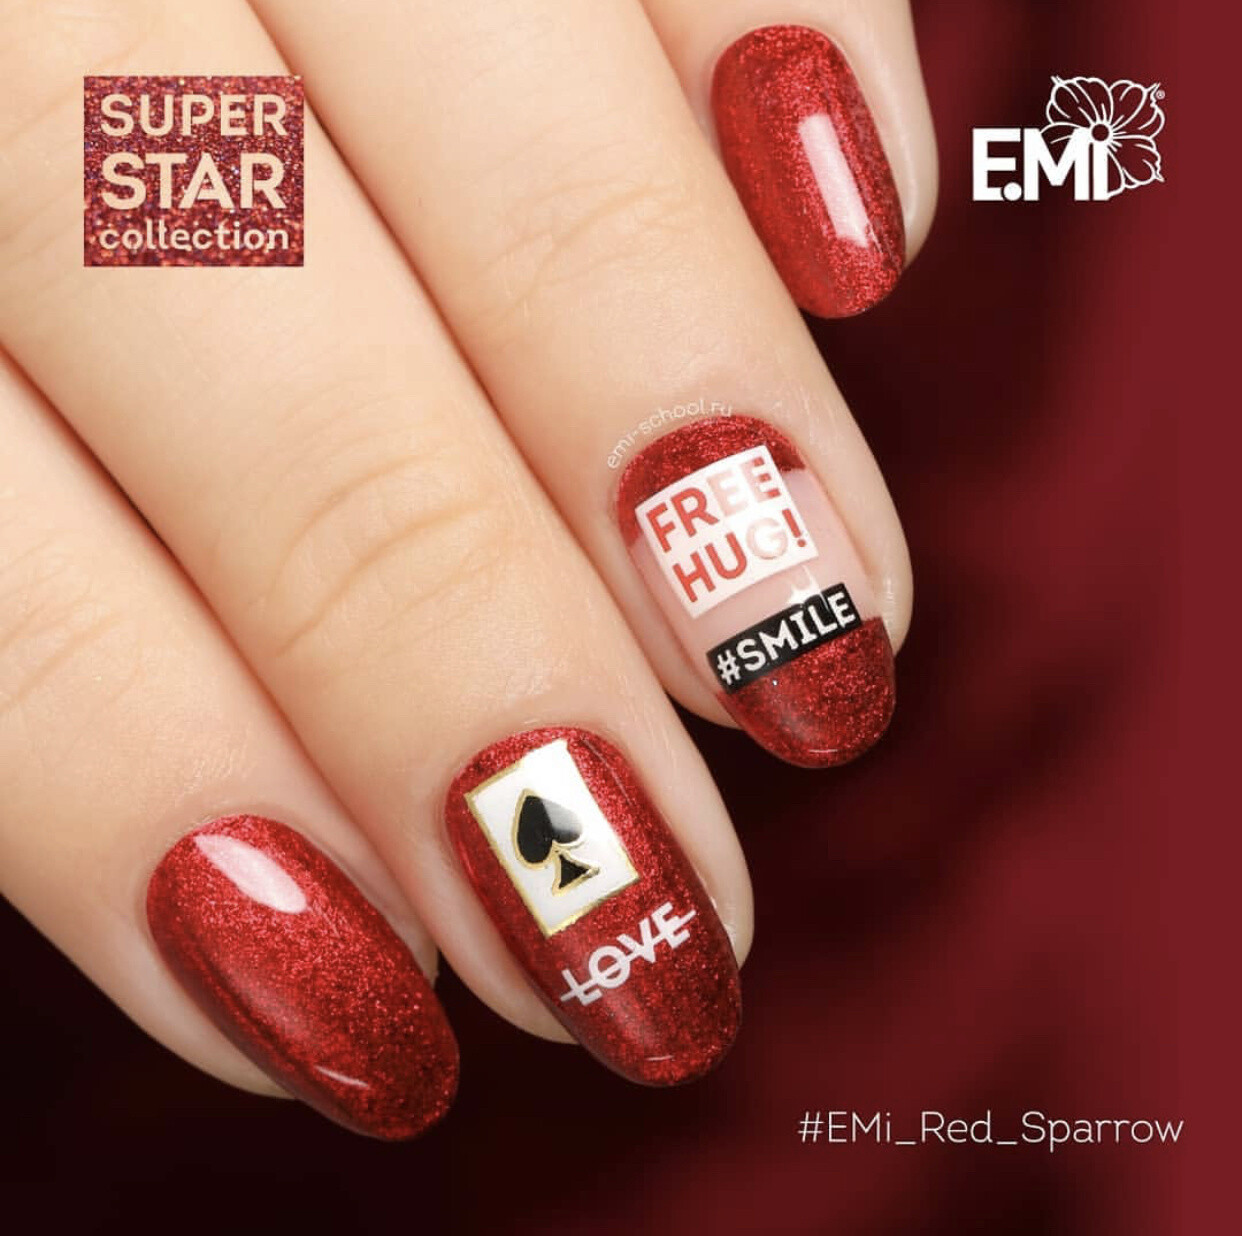 Super Star Red Sparrow, 5 ml.